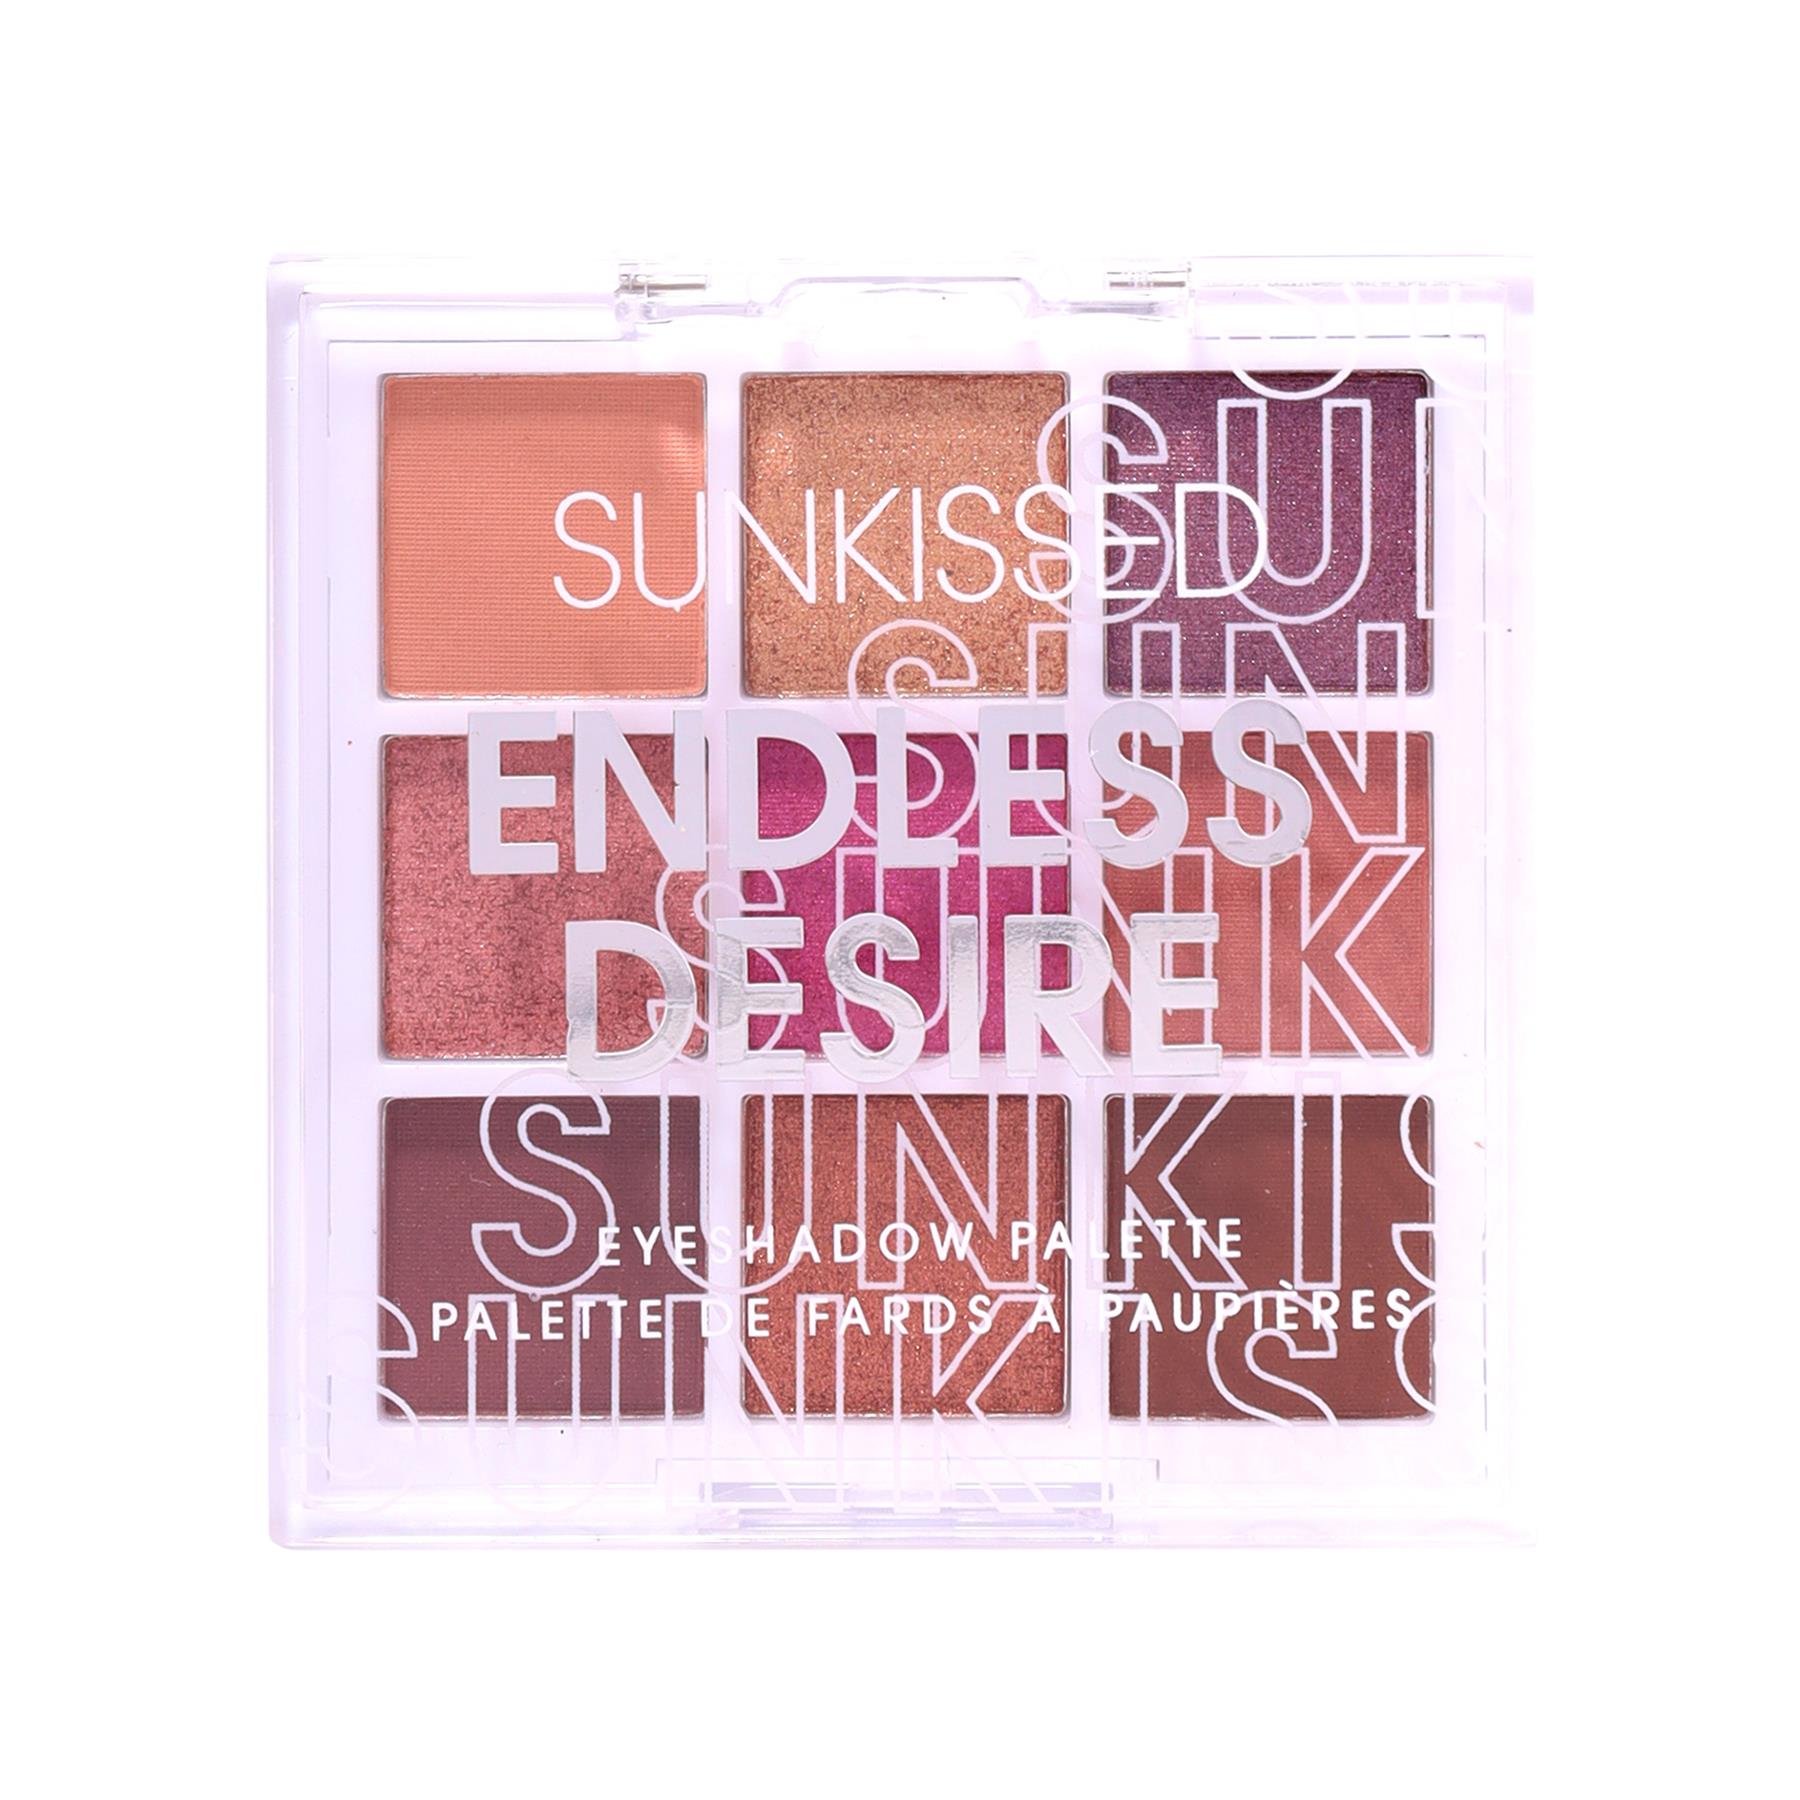 Sunkissed Endless Desire Eyeshadow Palette from Perfume Plus Direct